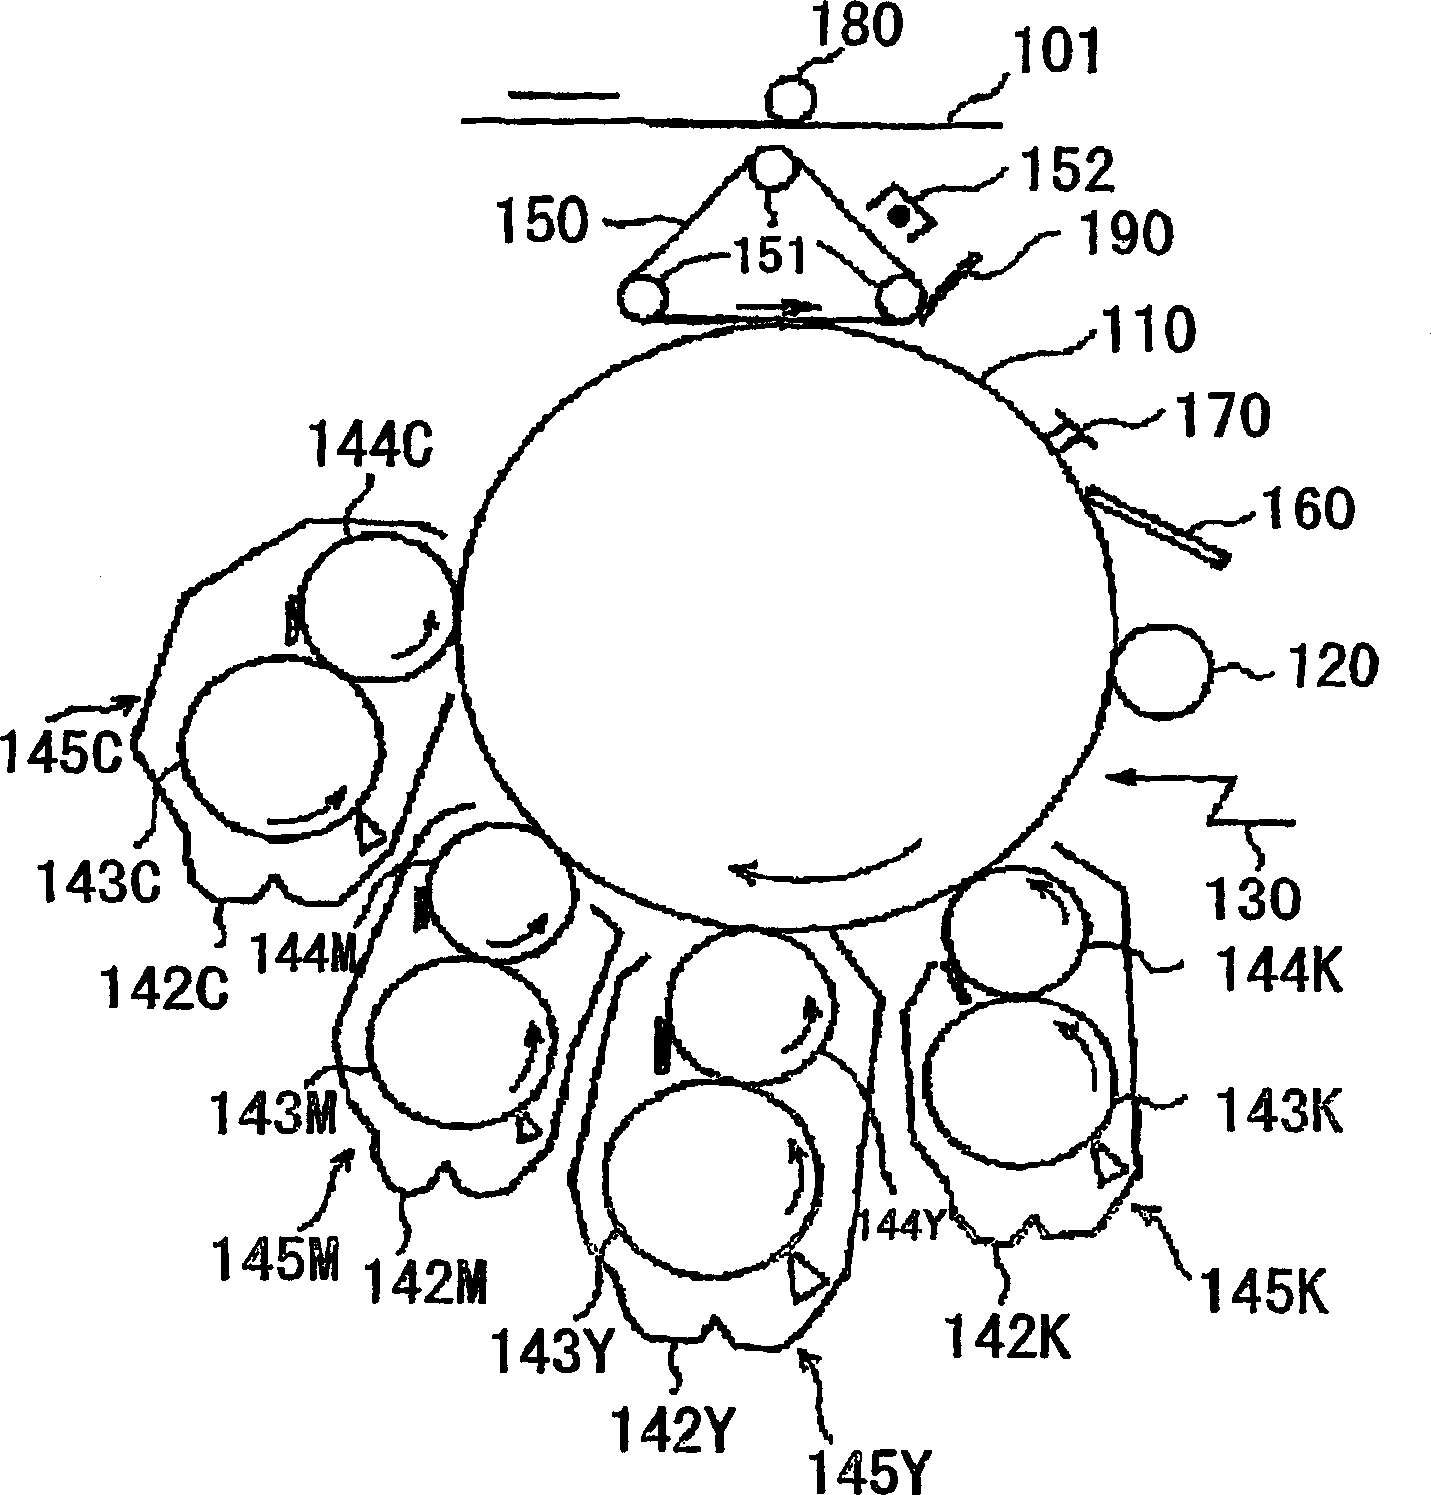 Toner for electrophotography and image forming apparatus